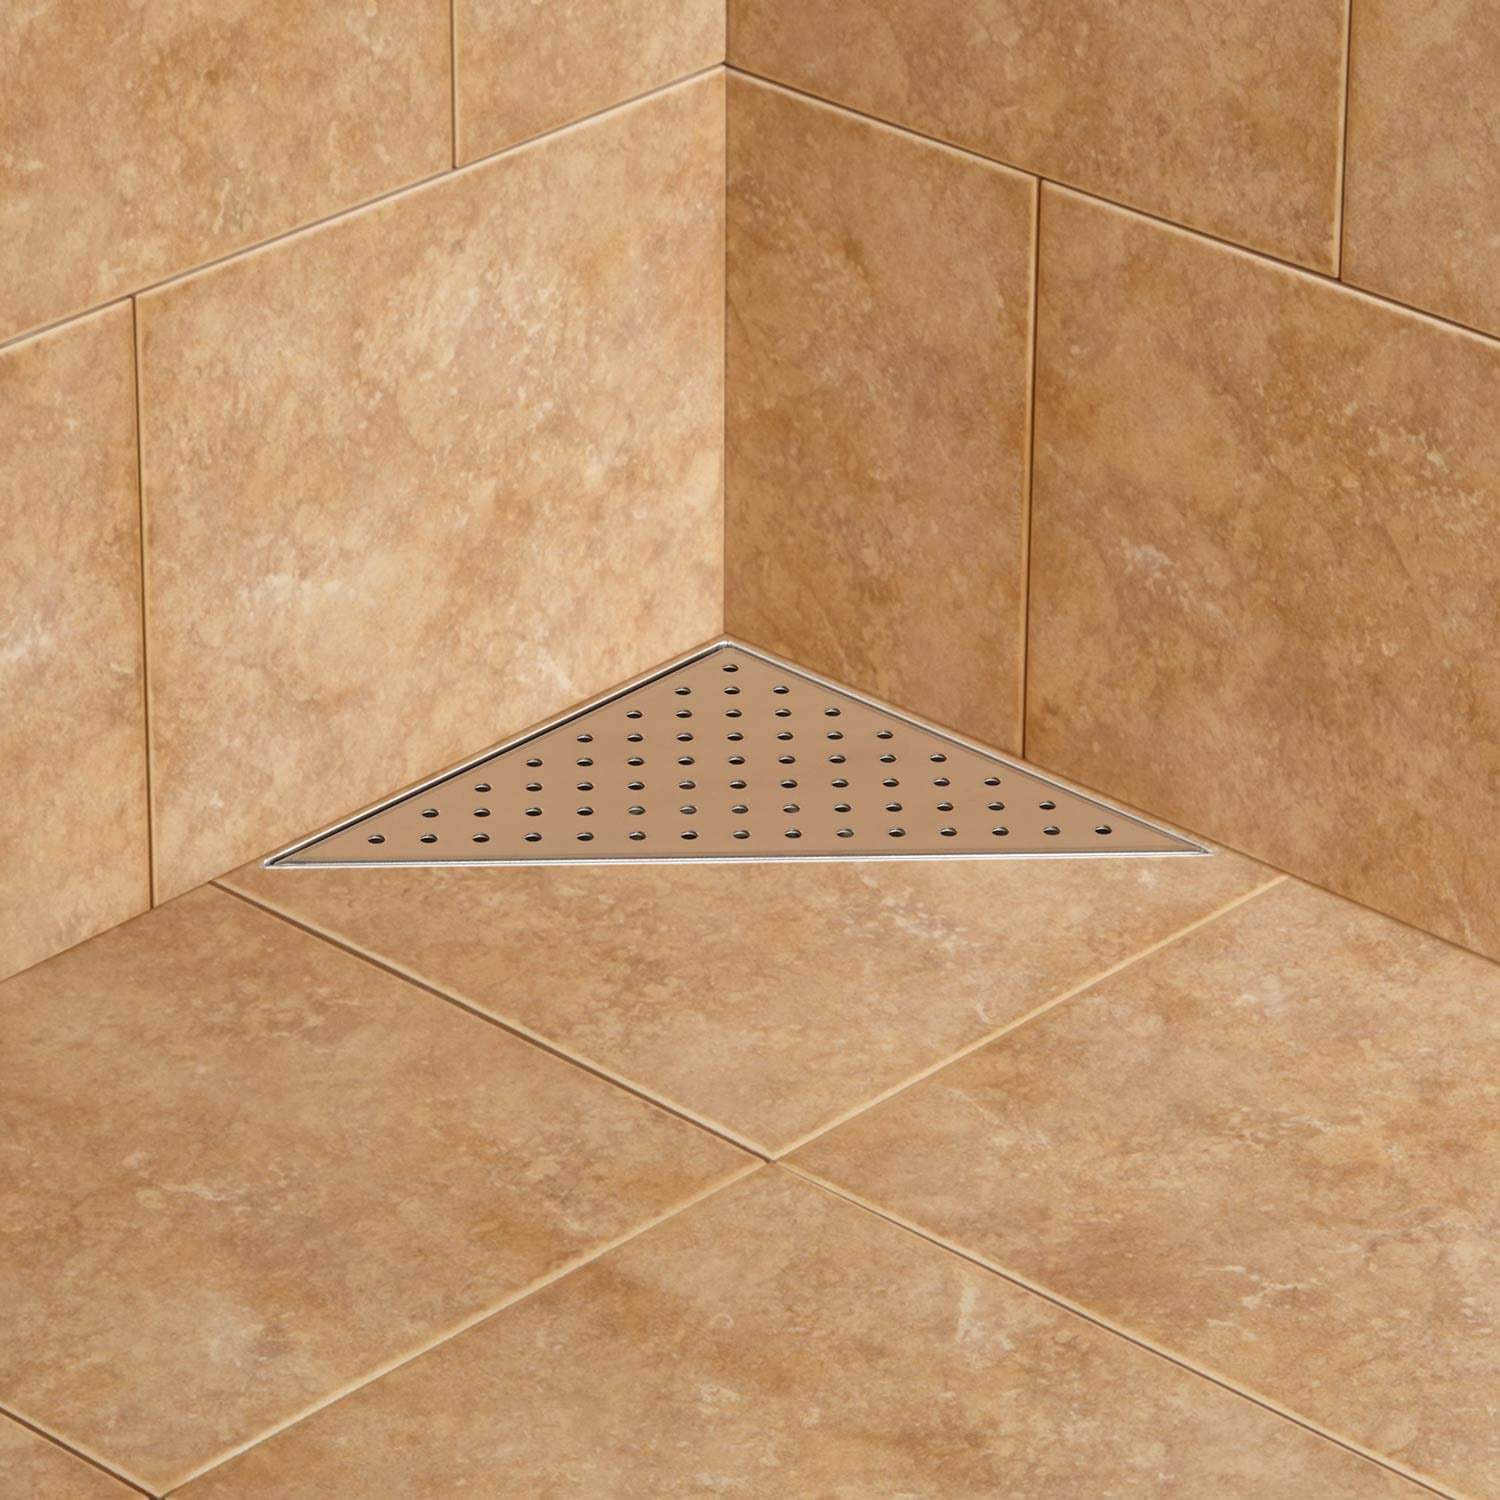 How to Unclog Your Shower Drain?